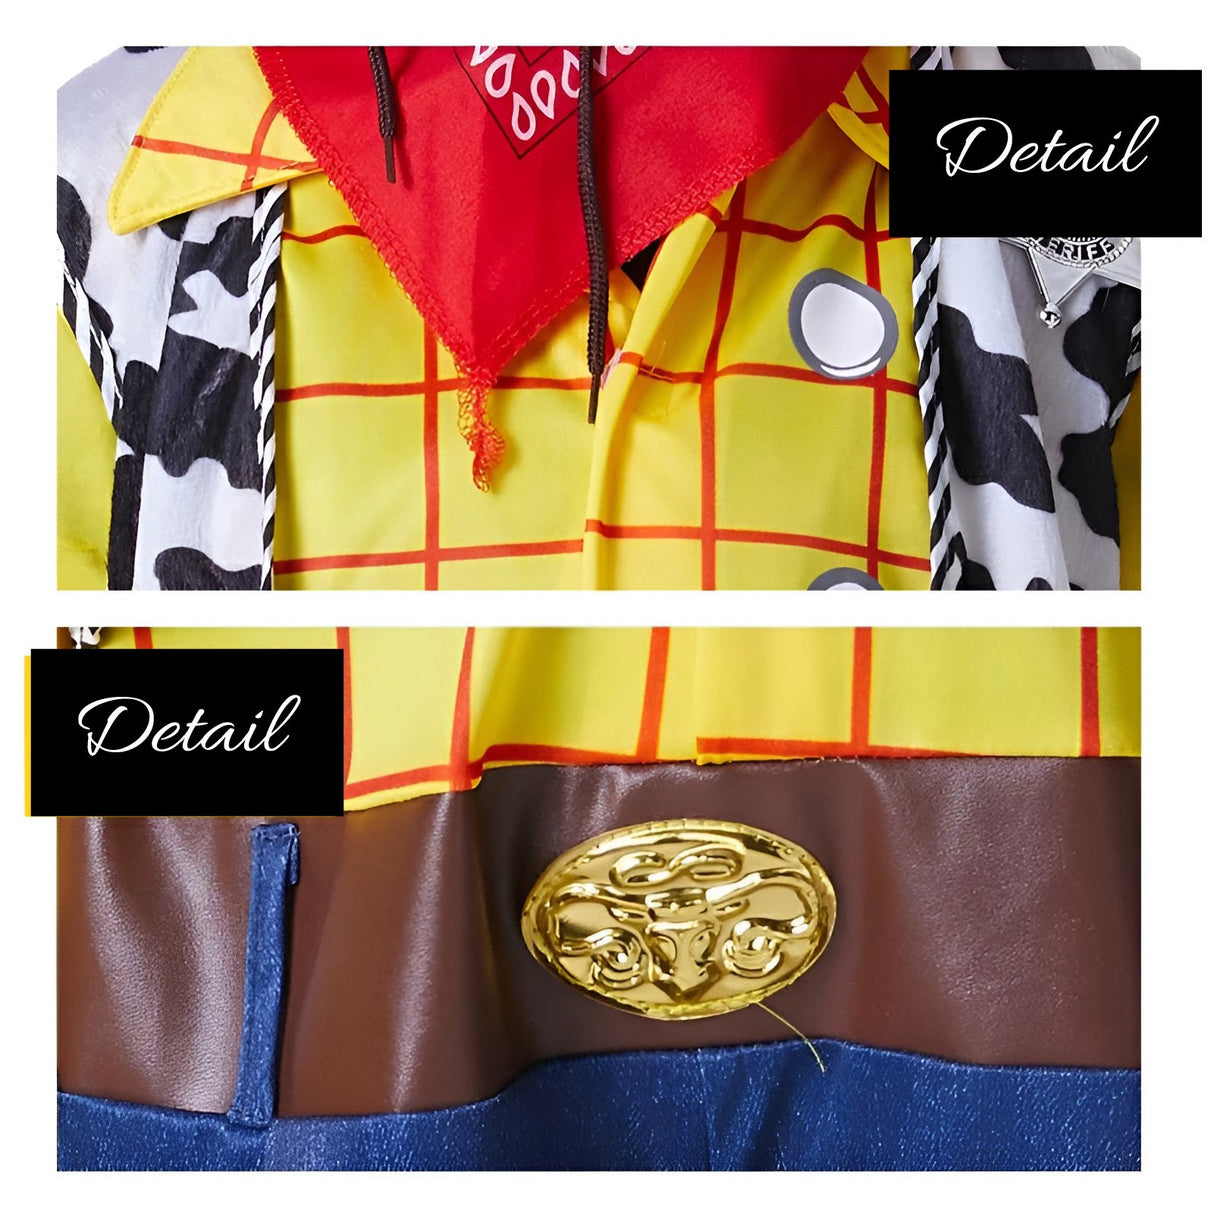 Toy Story Woody Cosplay Costume